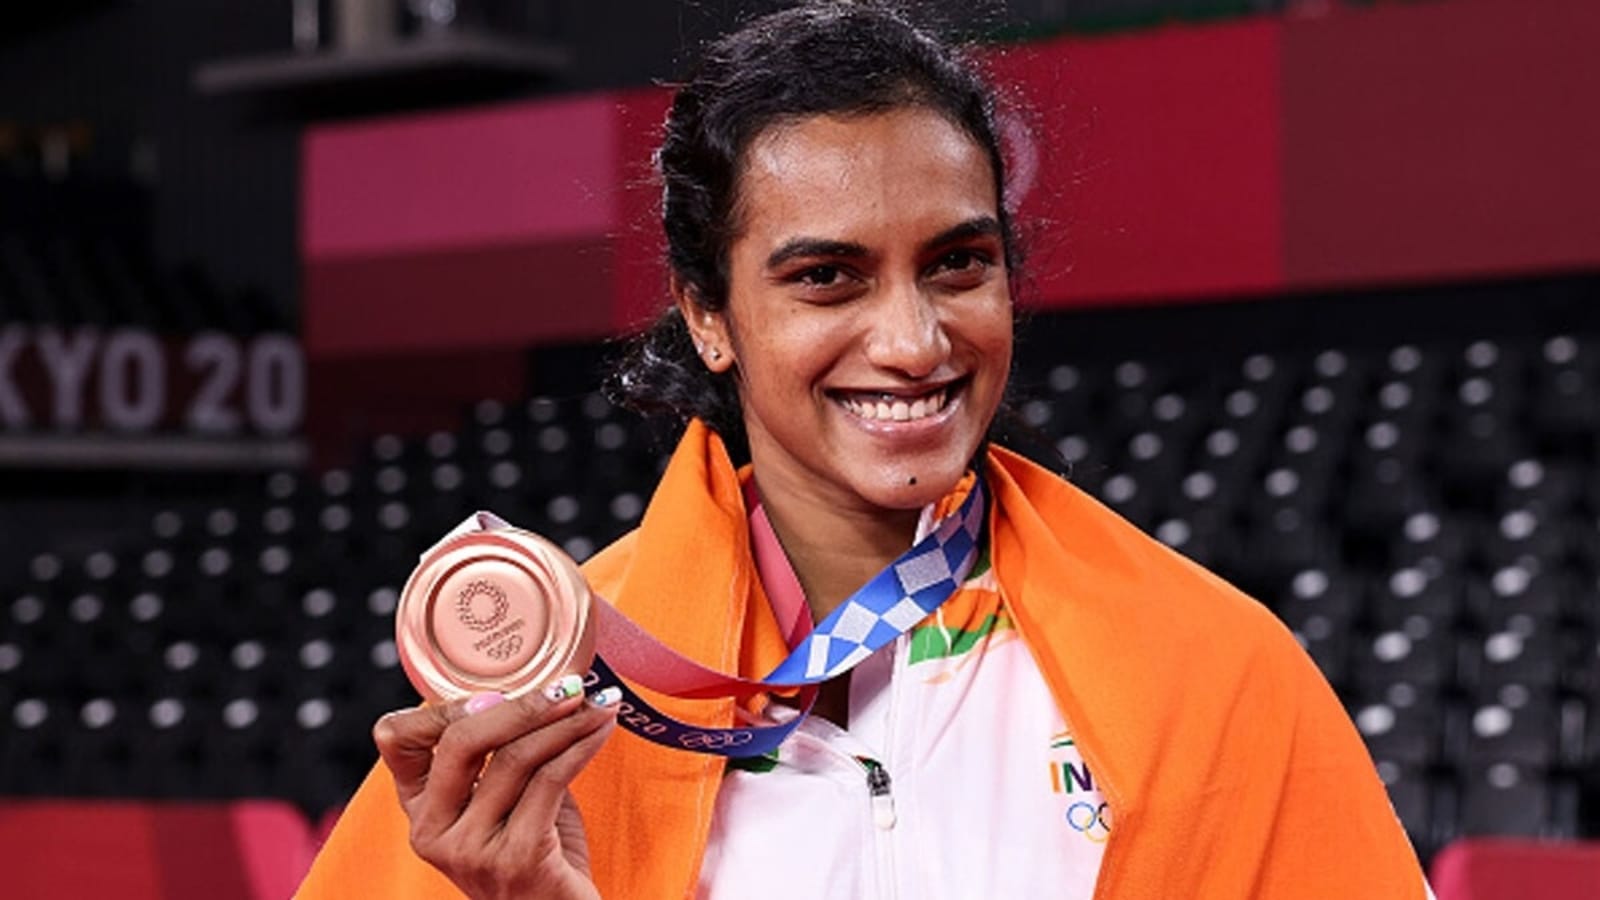 PV Sindhu wins bronze medal to create history for India at Tokyo Olympics | Olympics - Hindustan Times